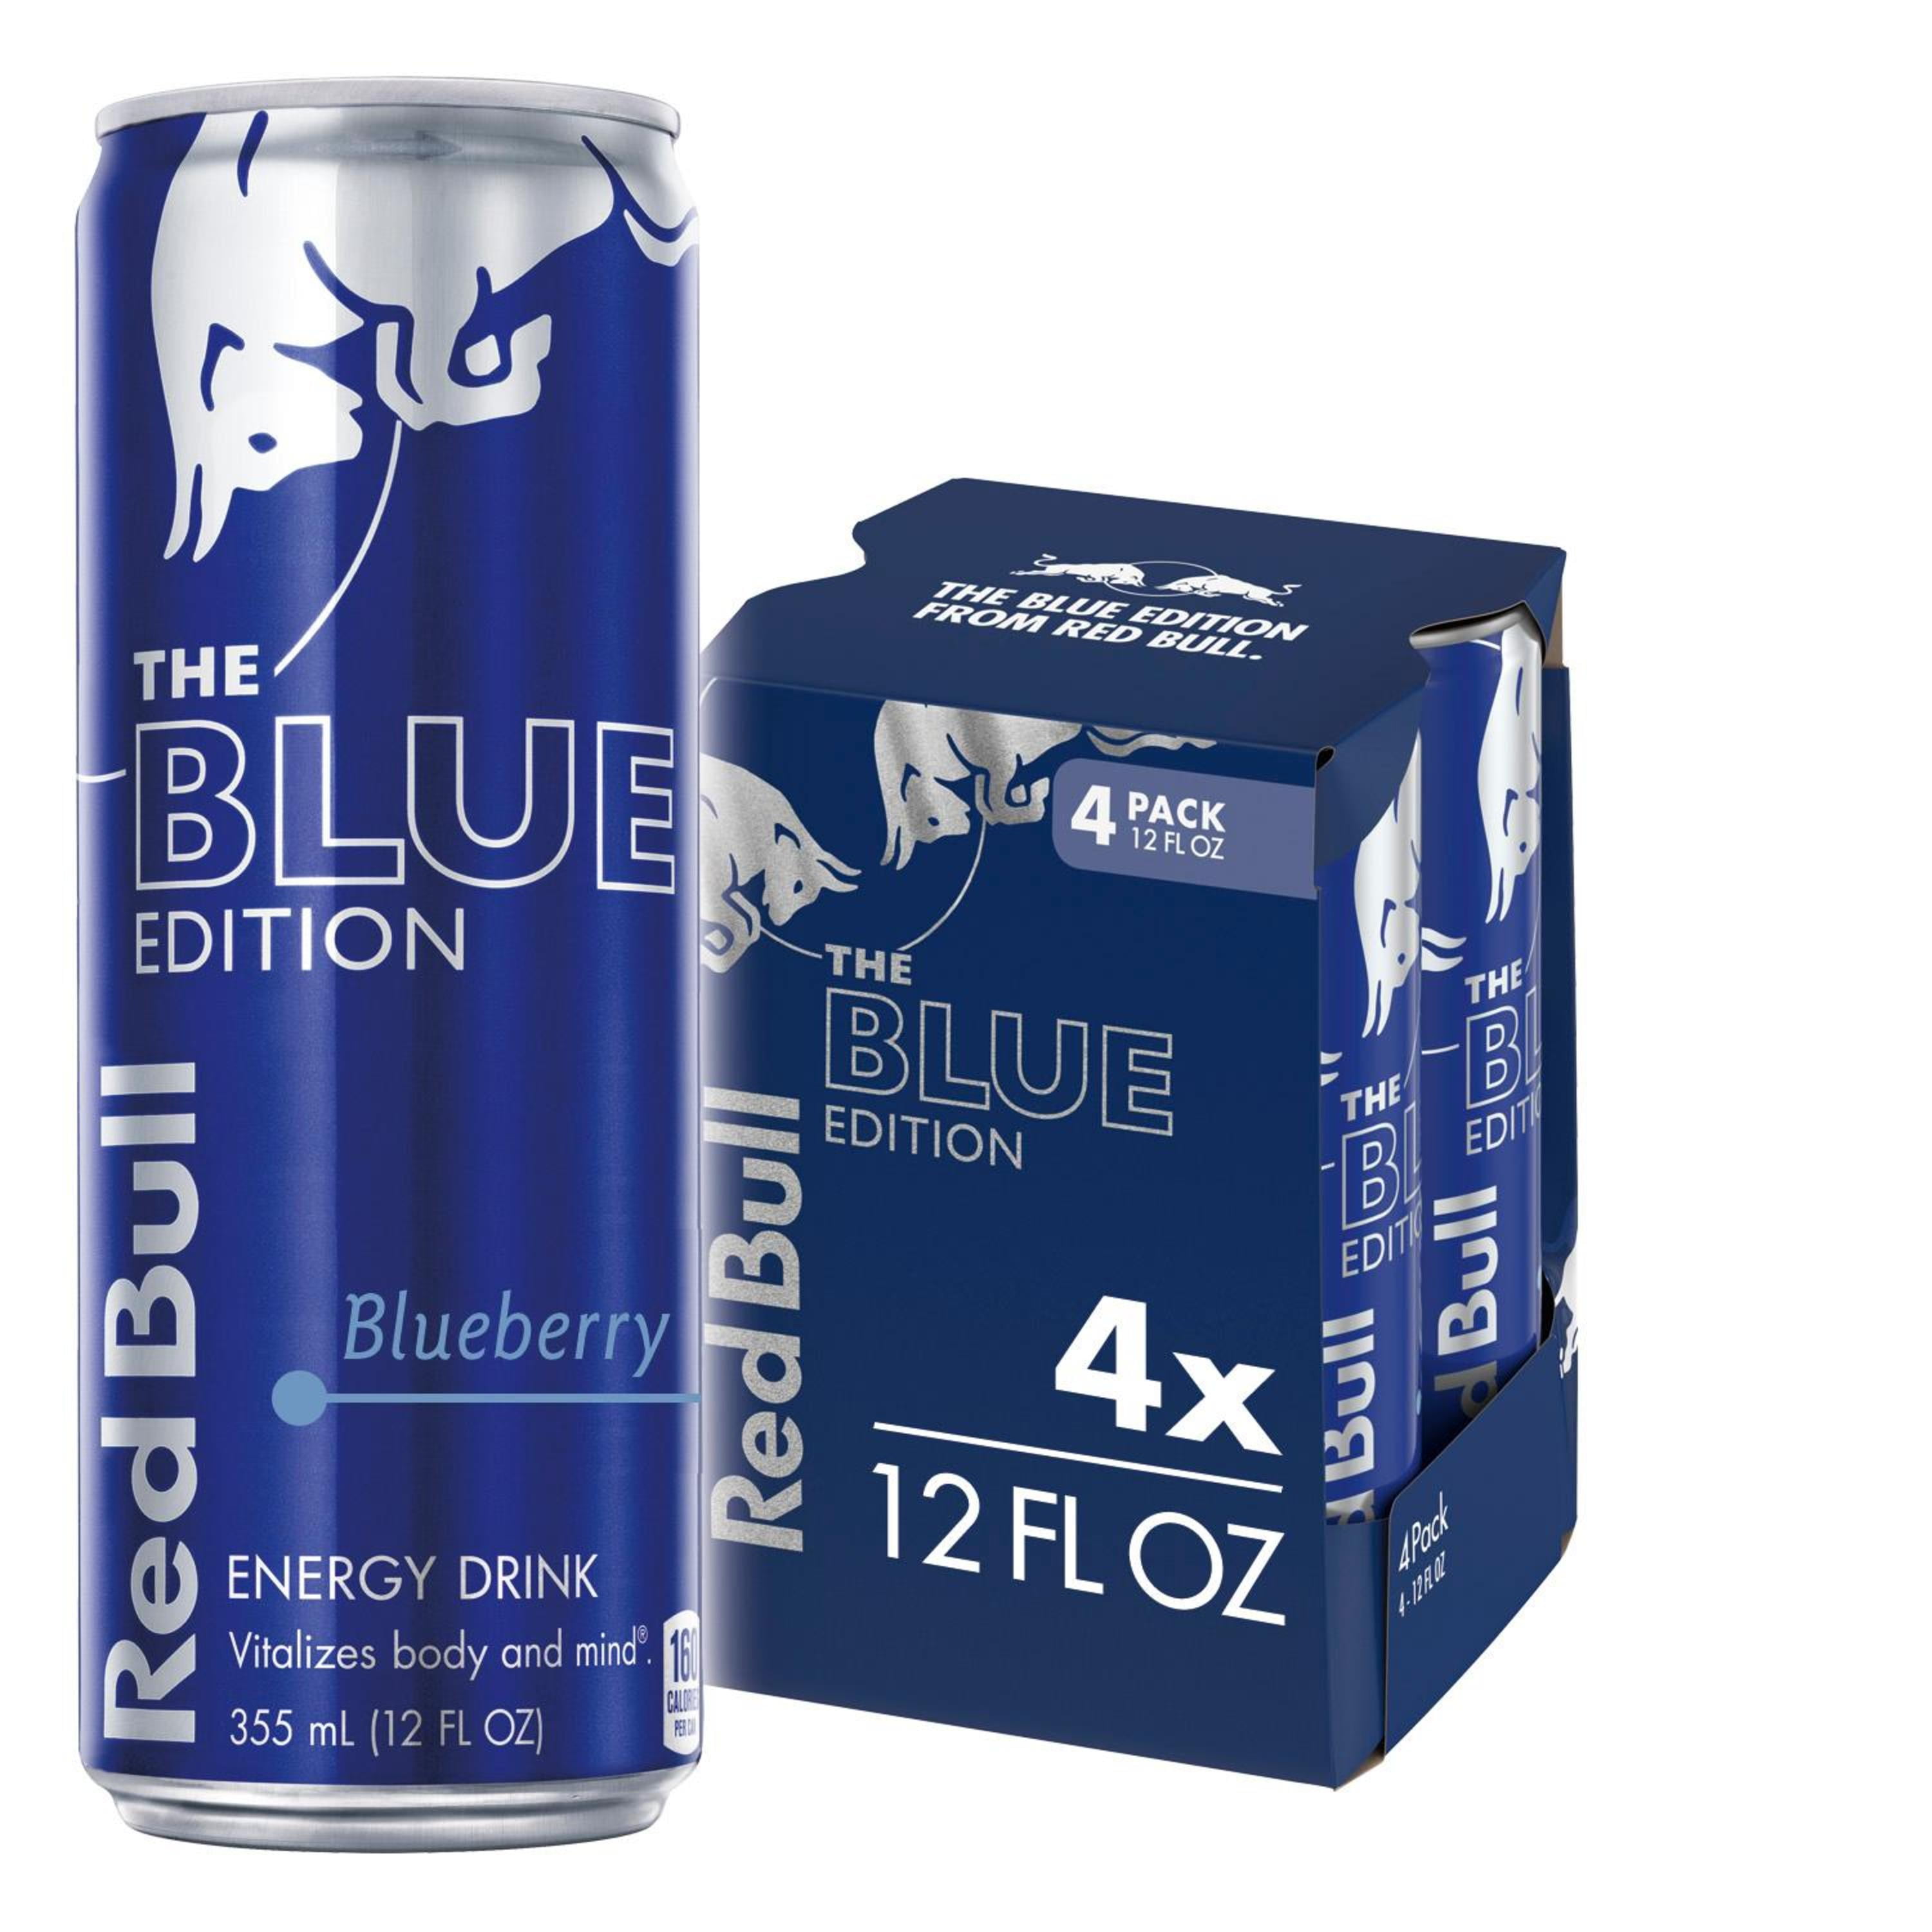 Red Bull Blue Blueberry Drink, 12 fl oz, Pack of 4 Cans Walmart.com